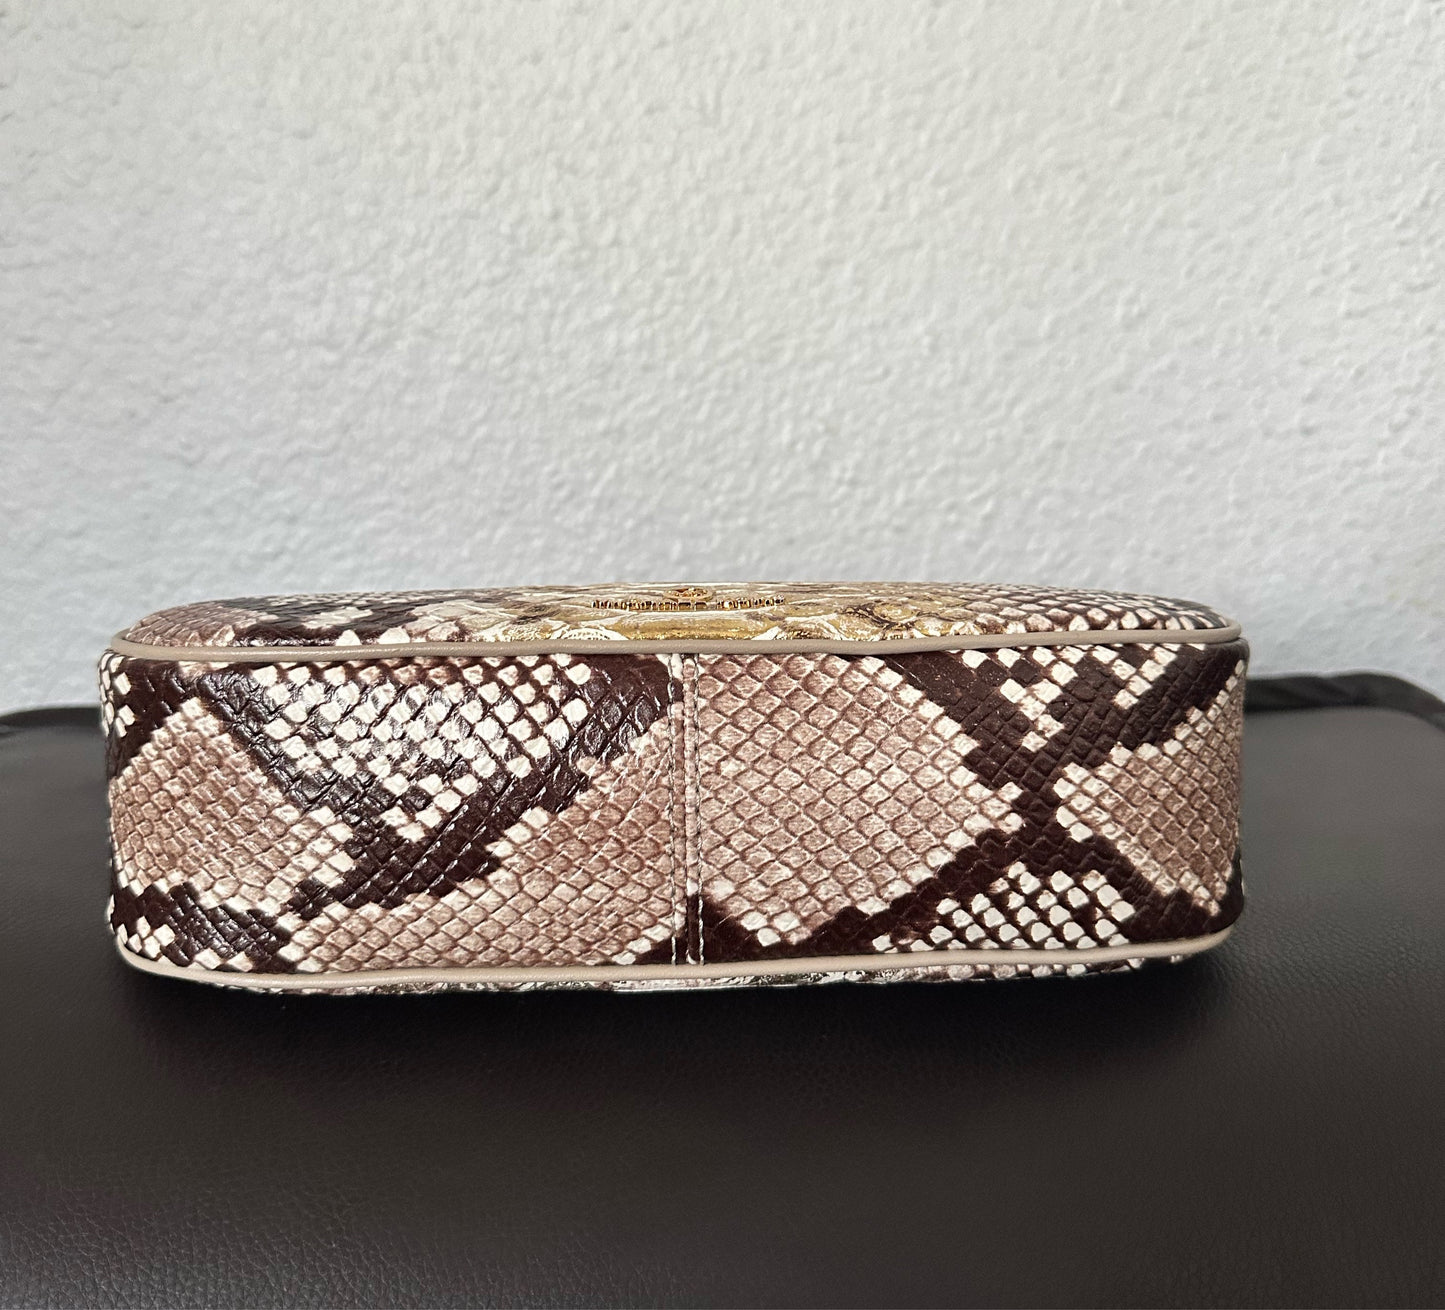 MICHAEL MICHAEL KORS Piper Small Two-Tone Snake Embossed Leather Shoulder Bag